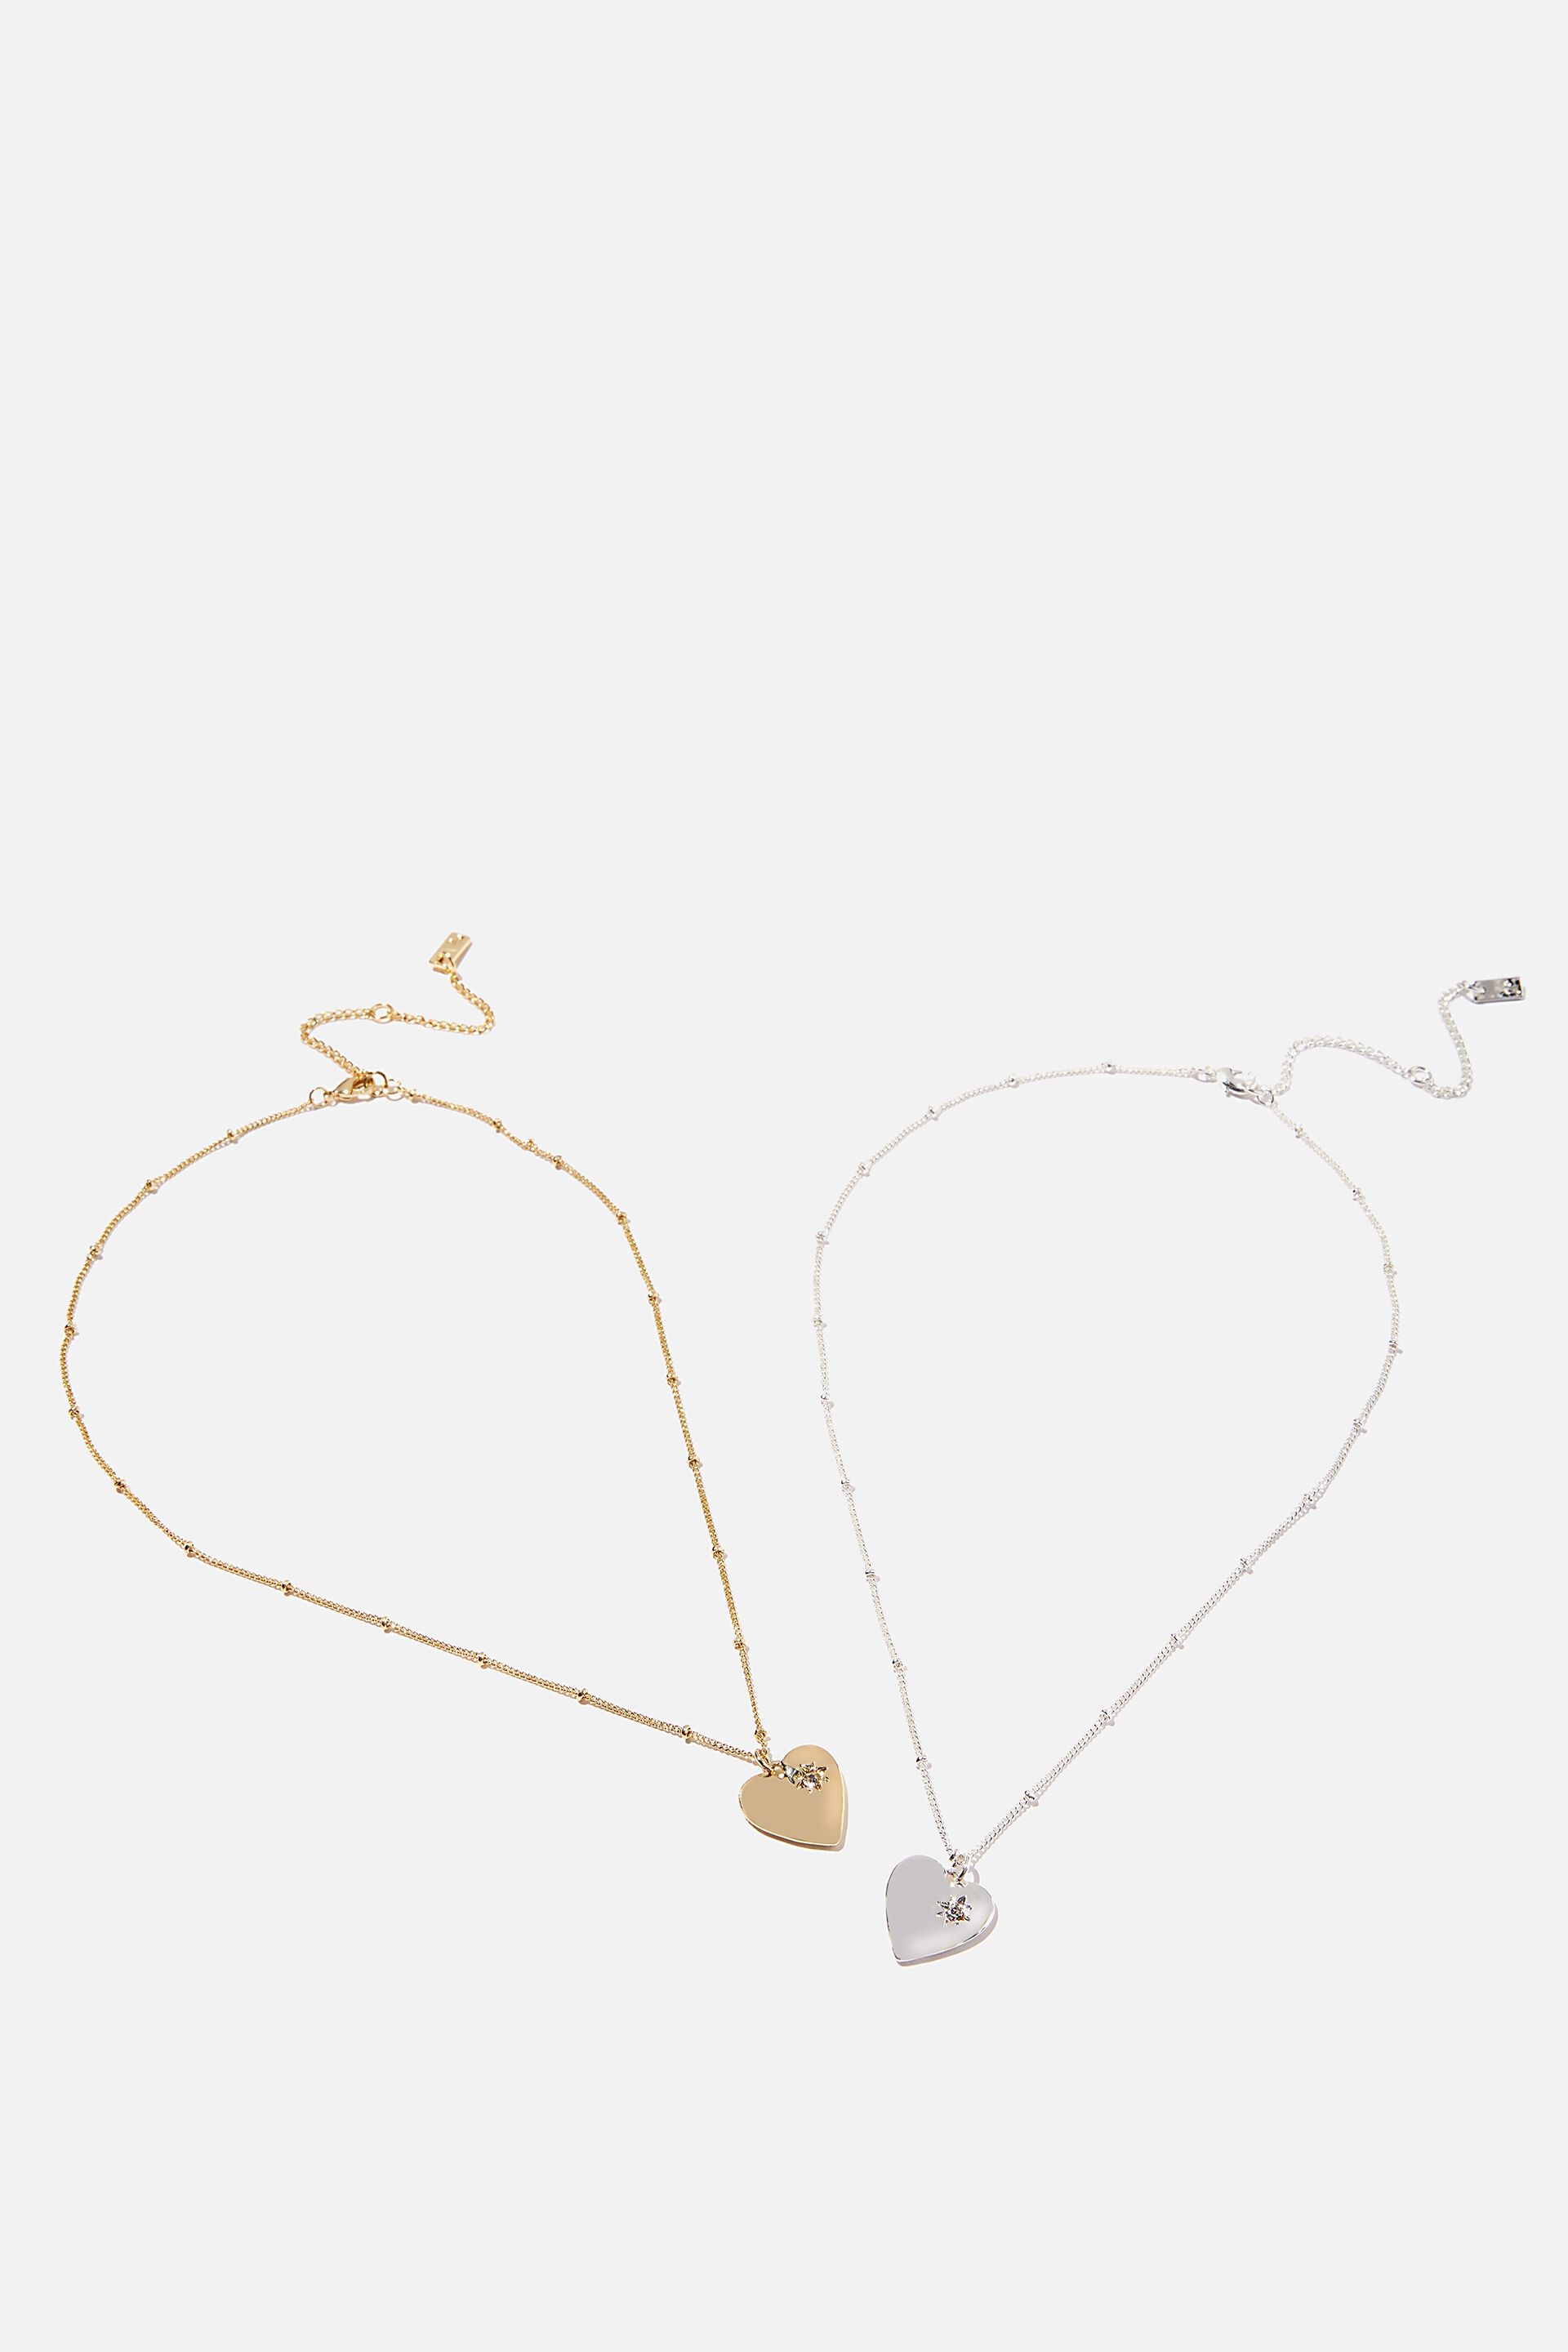 Gifts Gifts For Her | Dear Bff 2Pk Necklace - TV24897